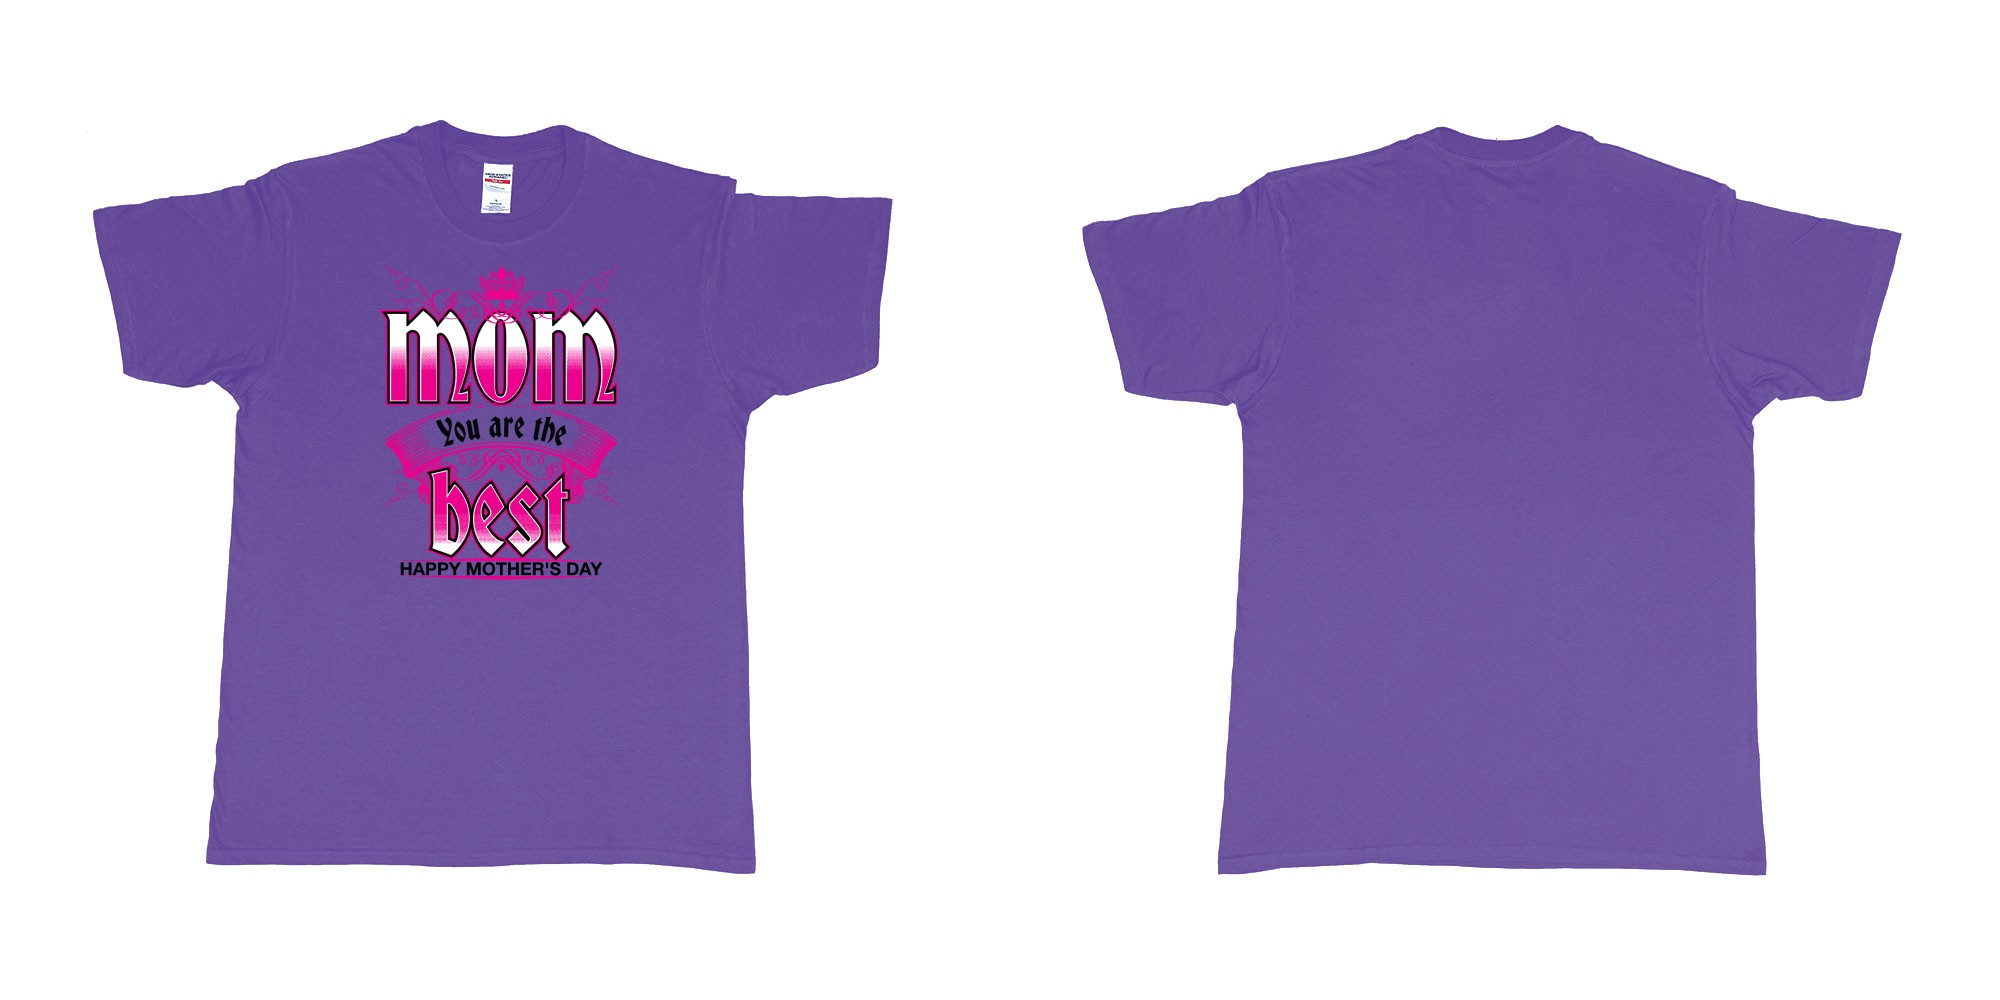 Custom tshirt design crown mom you are the best happy morthers day in fabric color purple choice your own text made in Bali by The Pirate Way